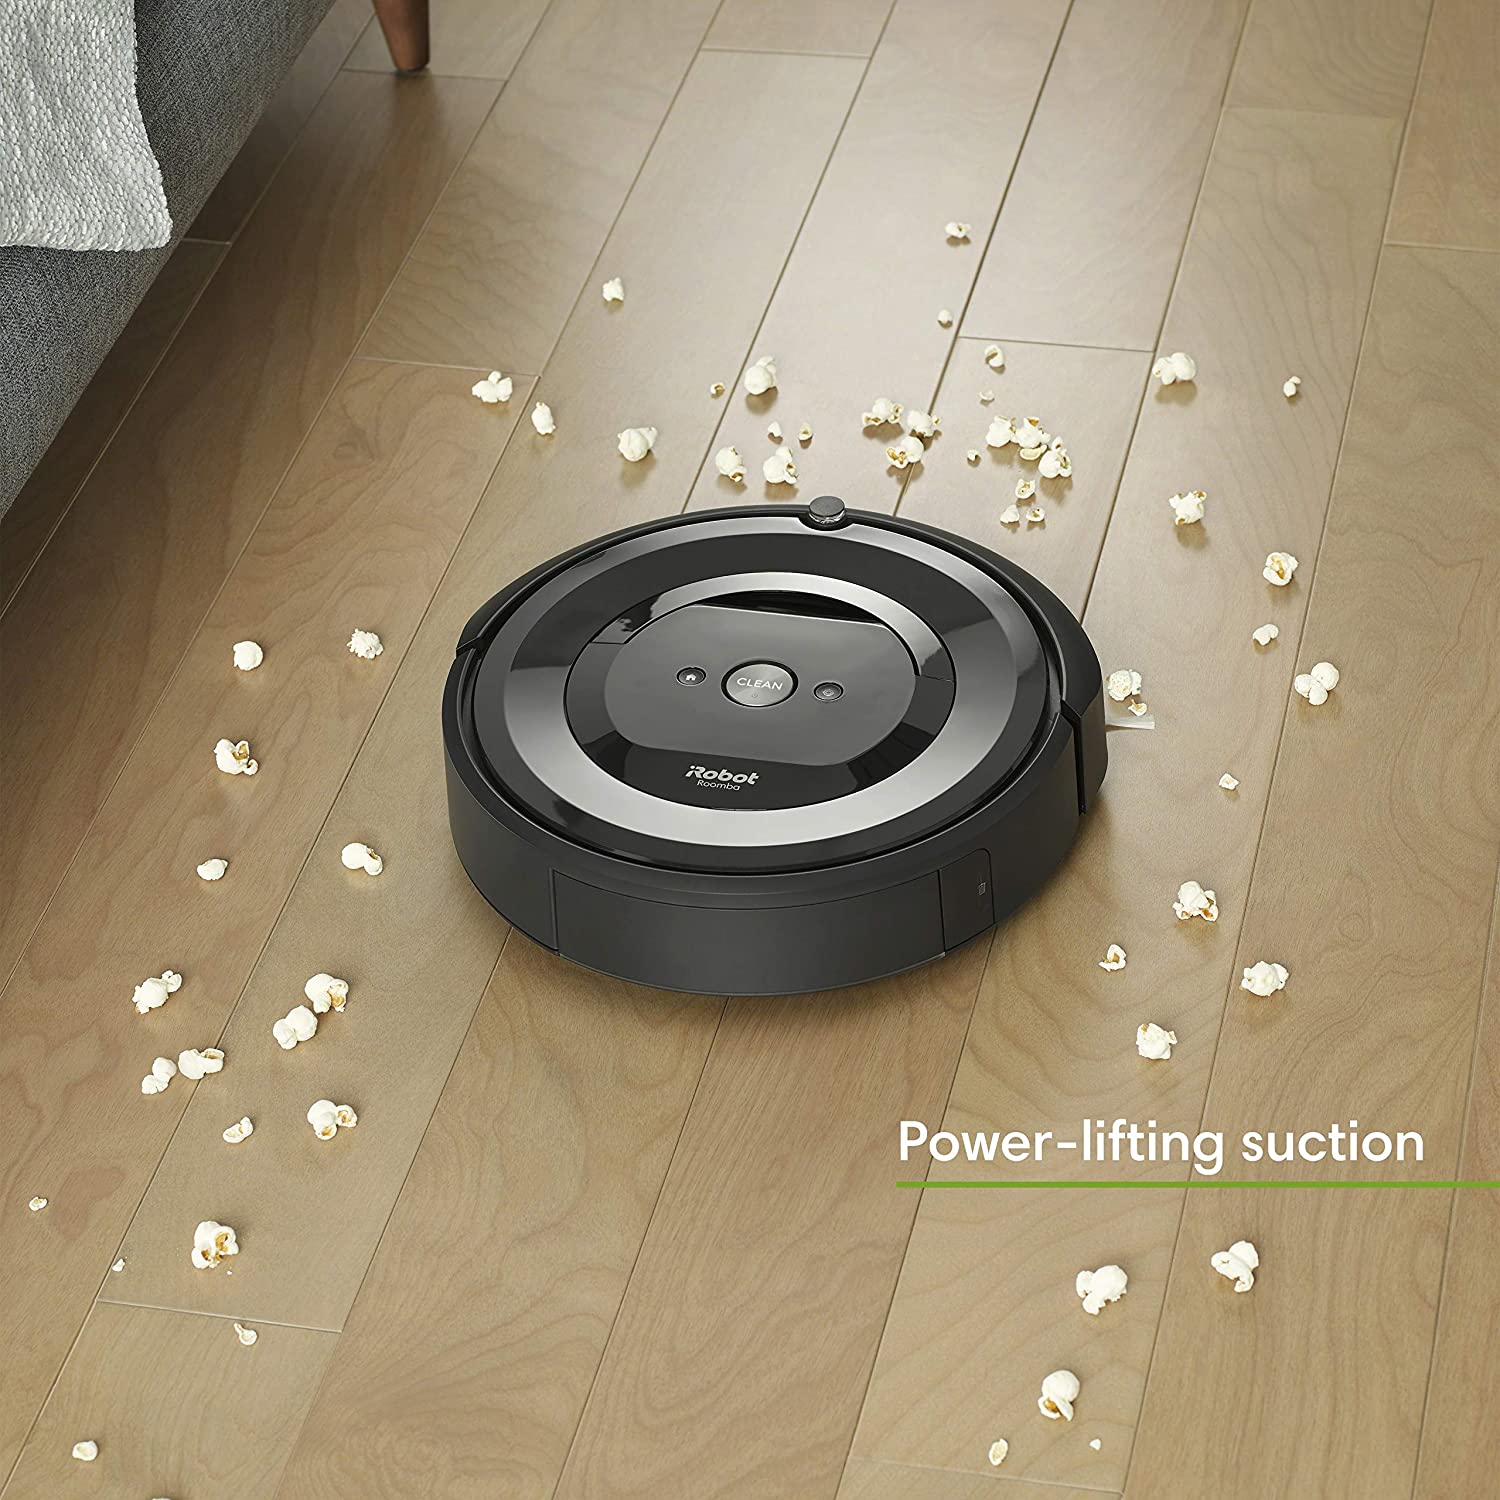 iRobot Roomba E5 (5150) Robot Vacuum - Wi-Fi Connected, Works with Alexa, Ideal for Pet Hair, Carpets, Hard, Self-Charging Robotic Vacuum, Black - image 3 of 3